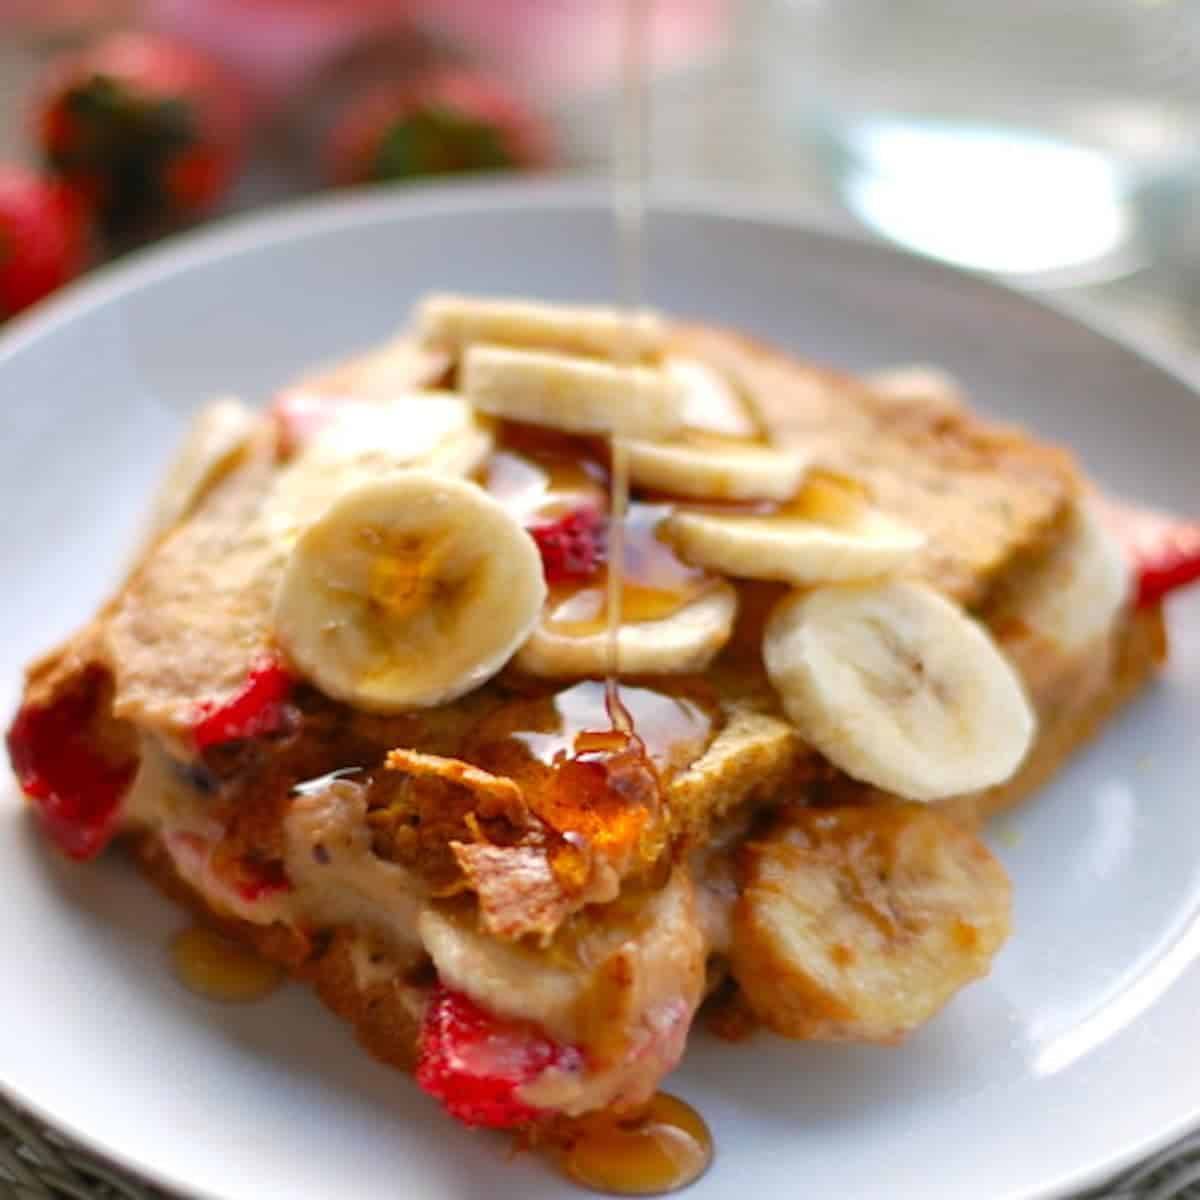 Stuffed French Toast with strawberries, bananas, and maple syrup drizzle on a white plate.